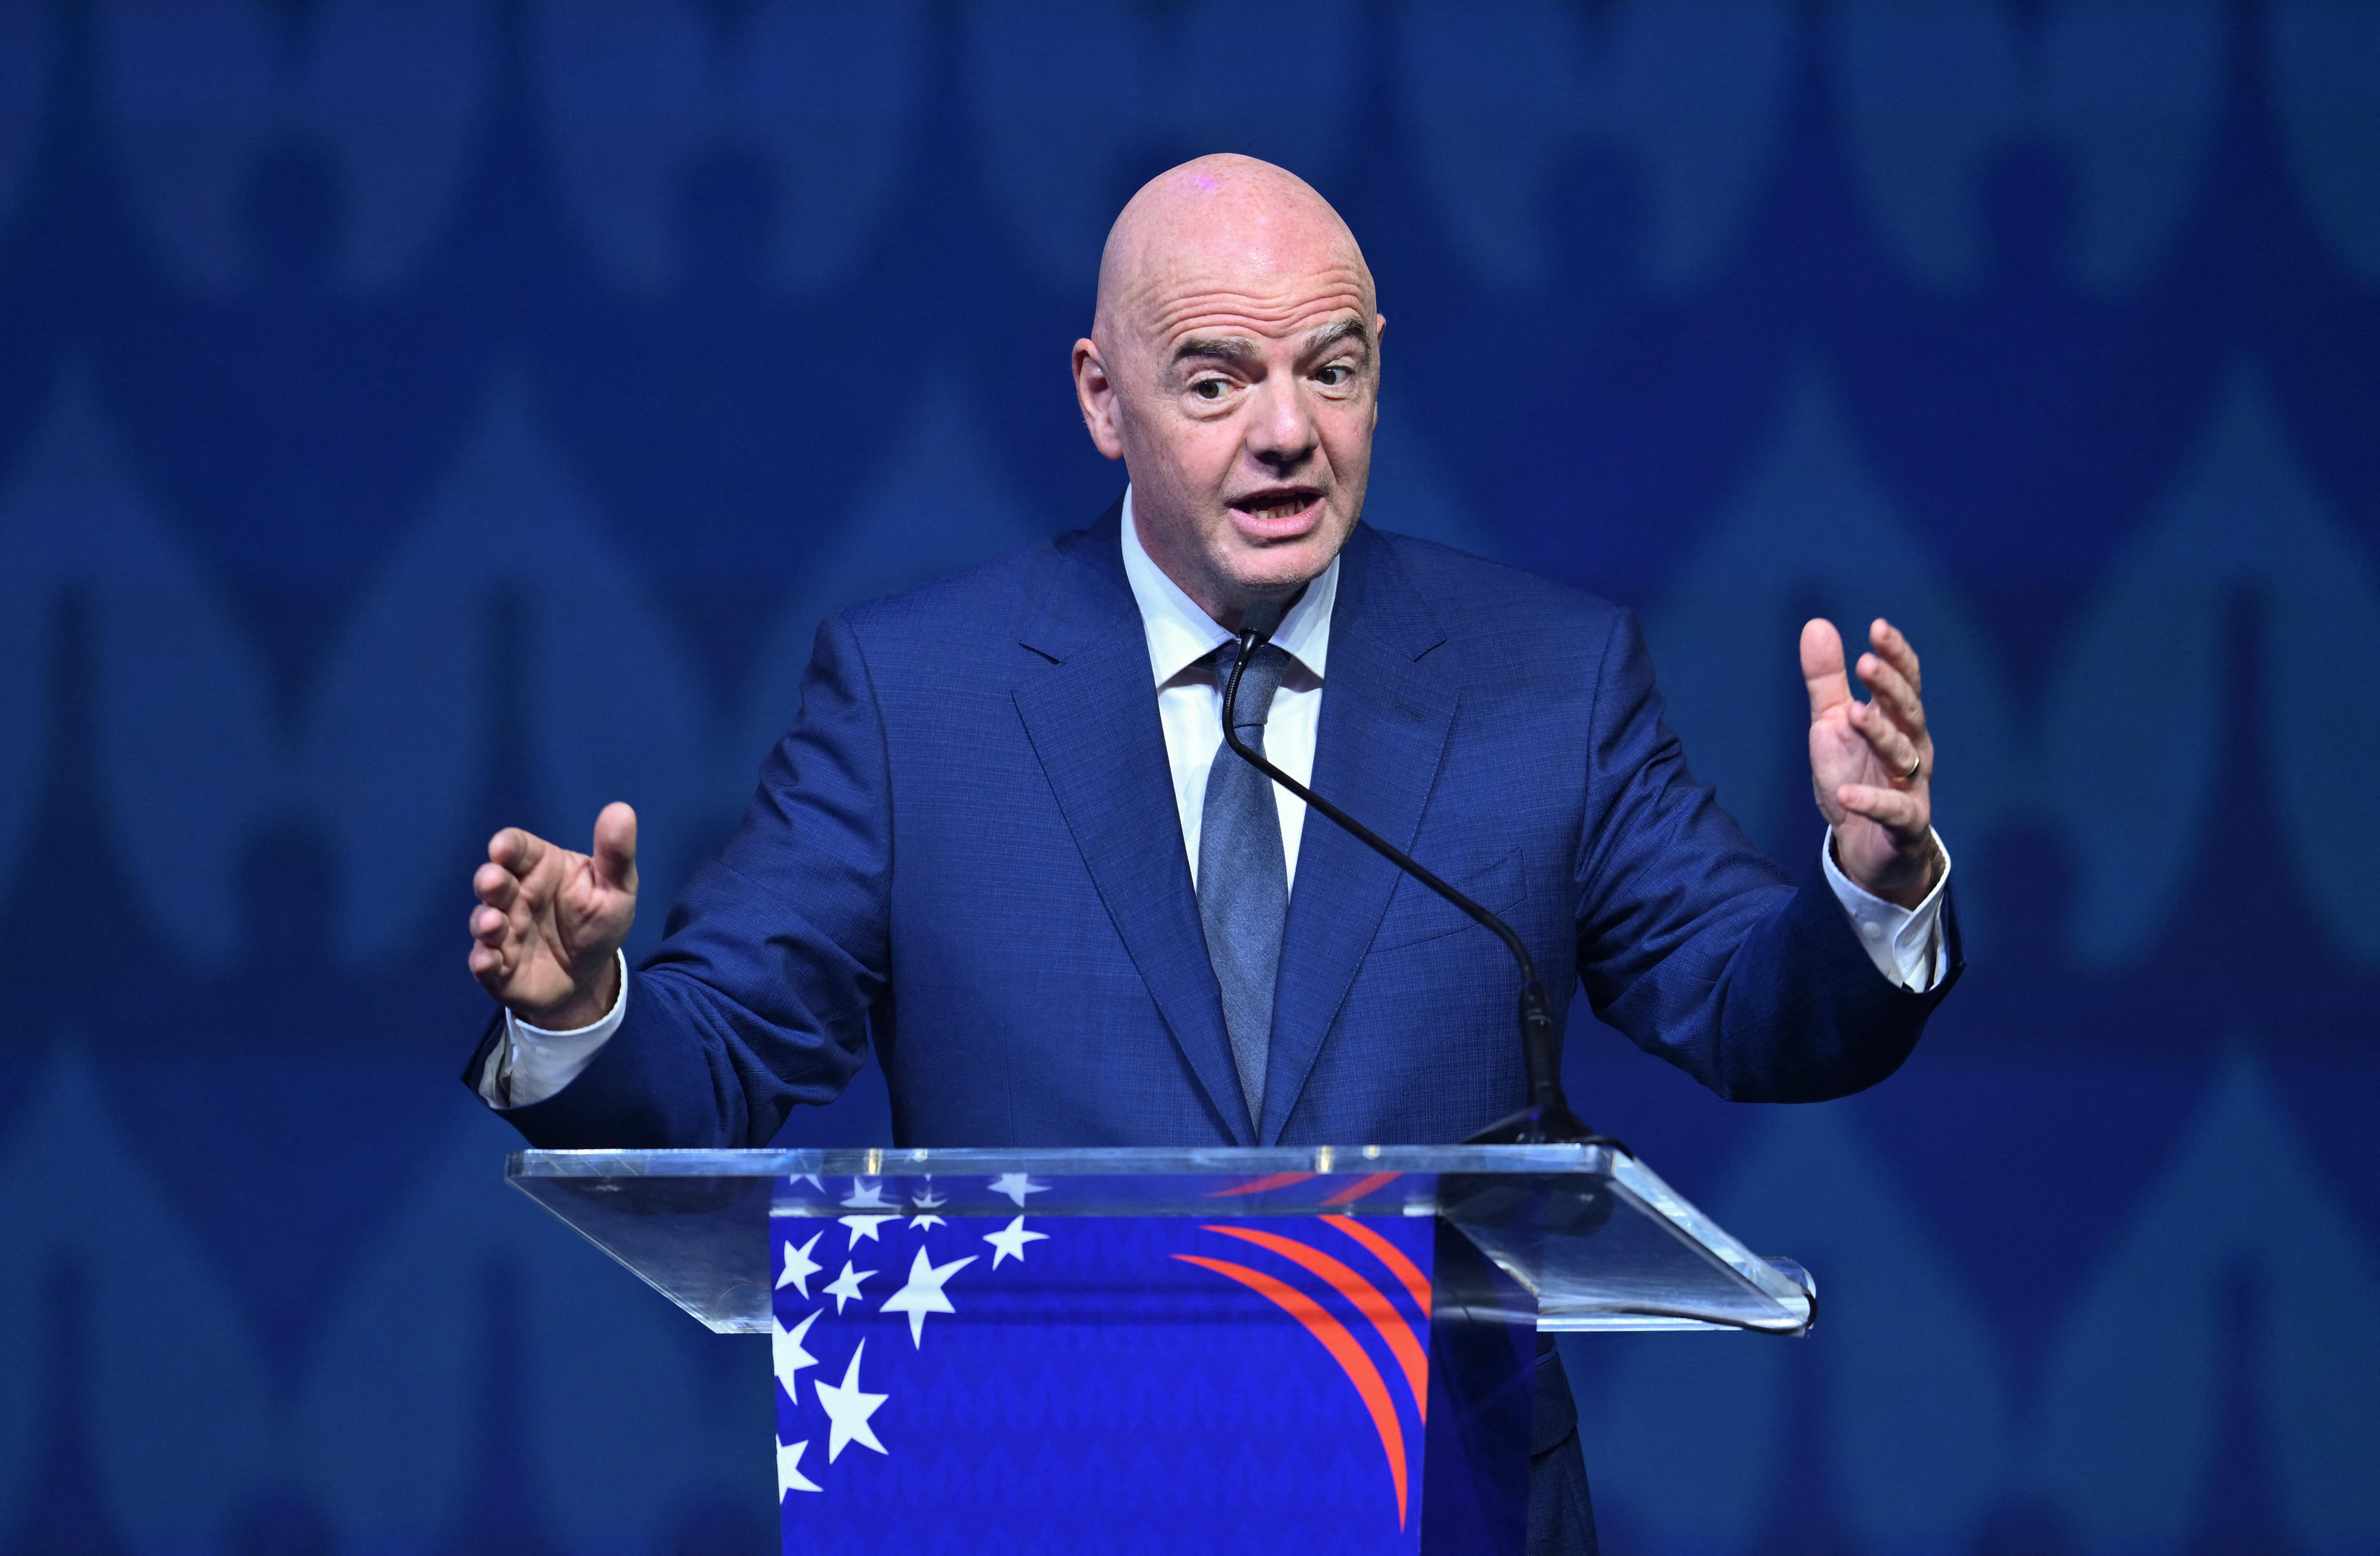 Fifa president Infantino calls for match forfeits over racism